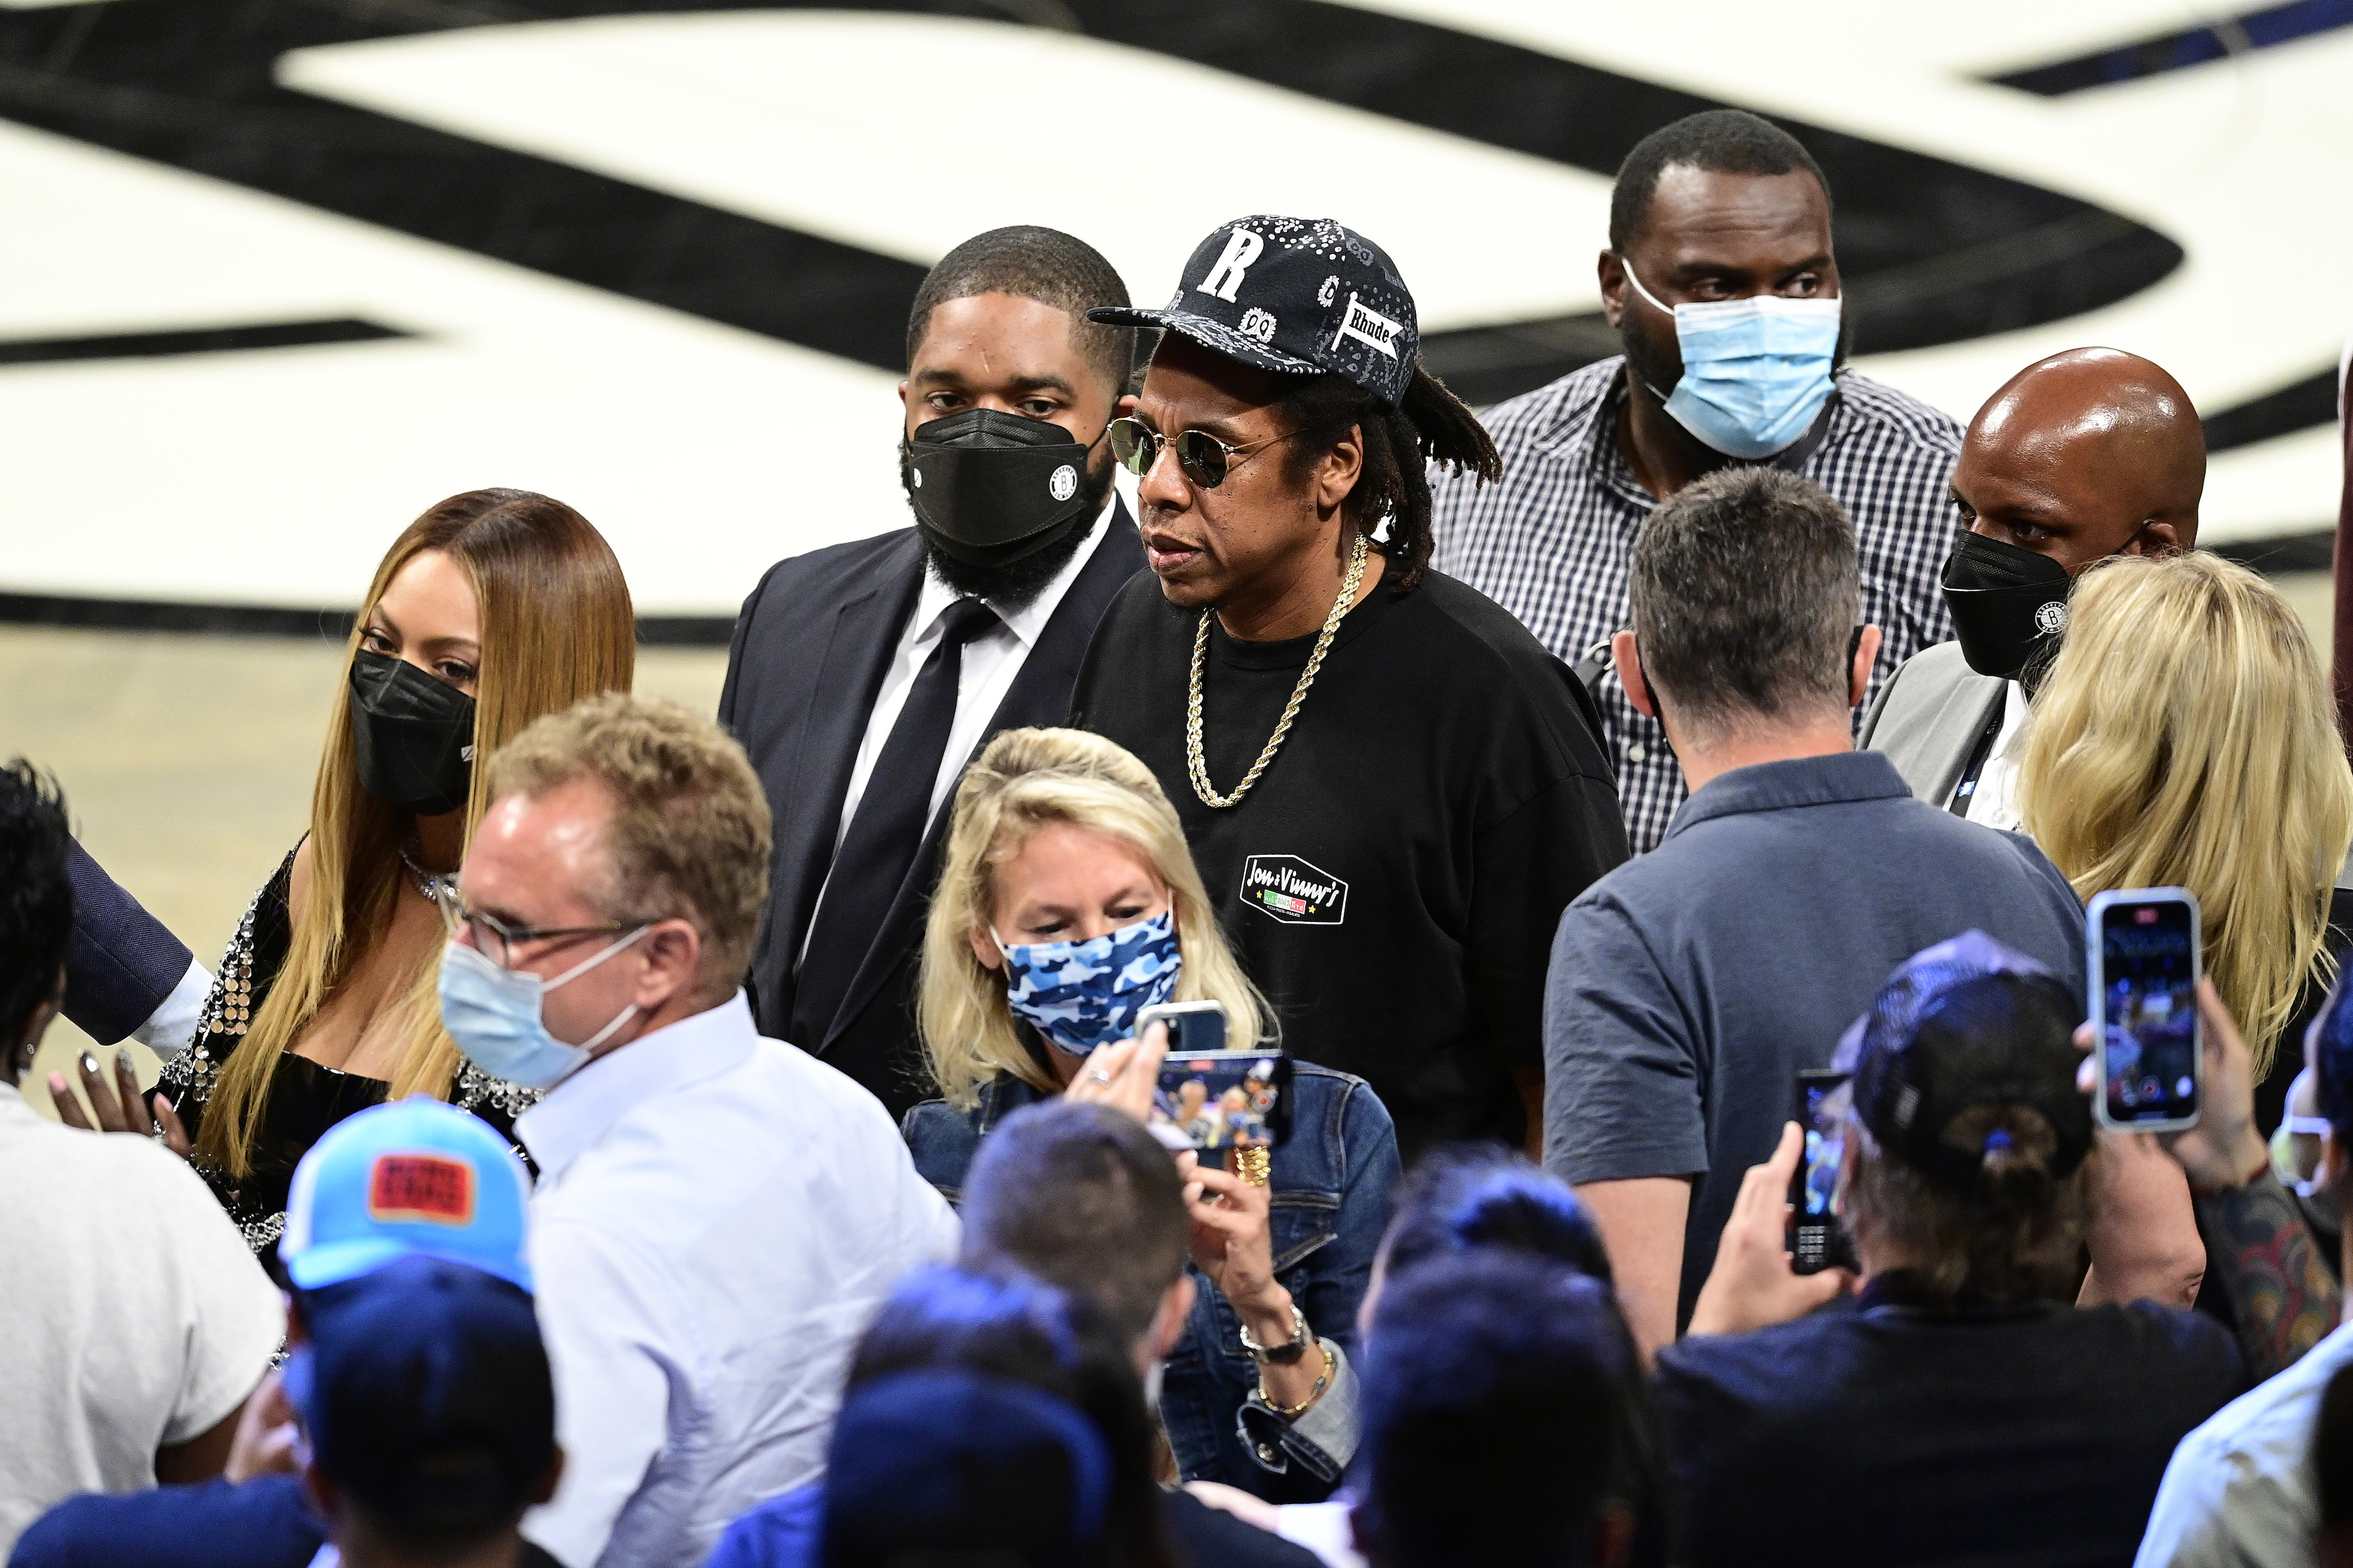 Jay-Z enters the Barclays Center ahead of a Nets-Bucks playoff game